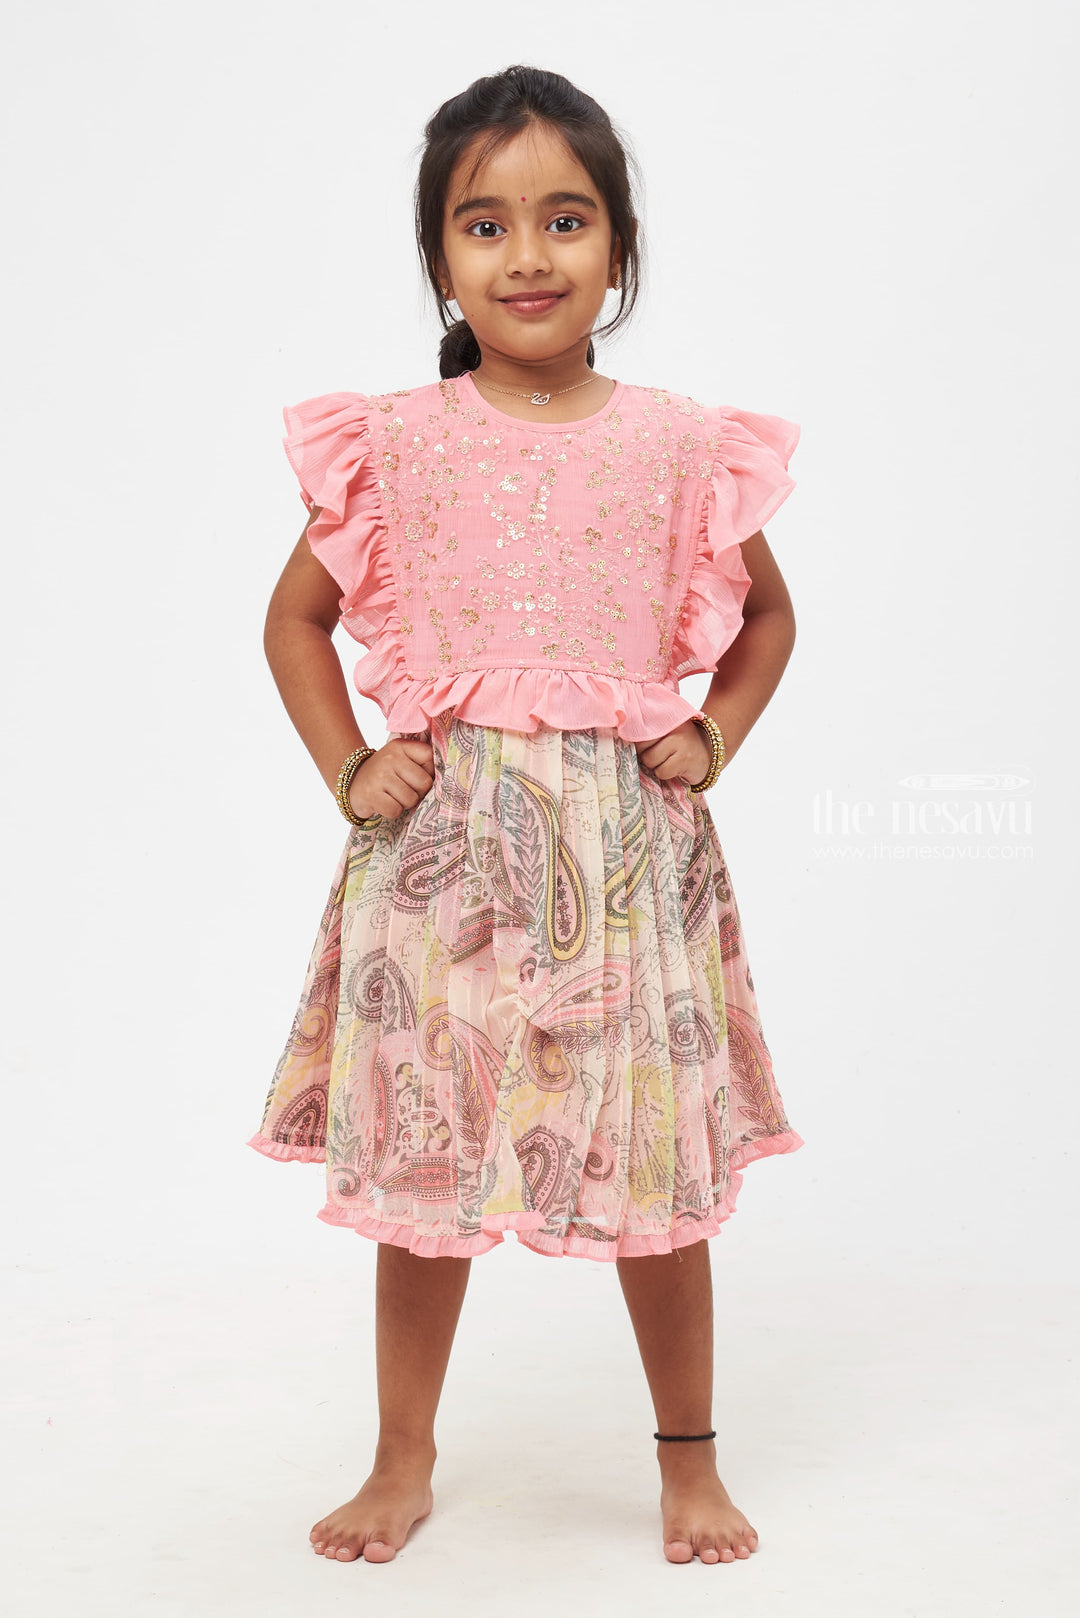 The Nesavu Girls Cotton Frock Whimsical Pink Paisley-Print Frock with Sequin Details Nesavu 22 (4Y) / Pink / Georgette GFC1164B-22 Gorgeous Pink Paisley Frock | A Blend of Tradition and Trend | The Nesavu